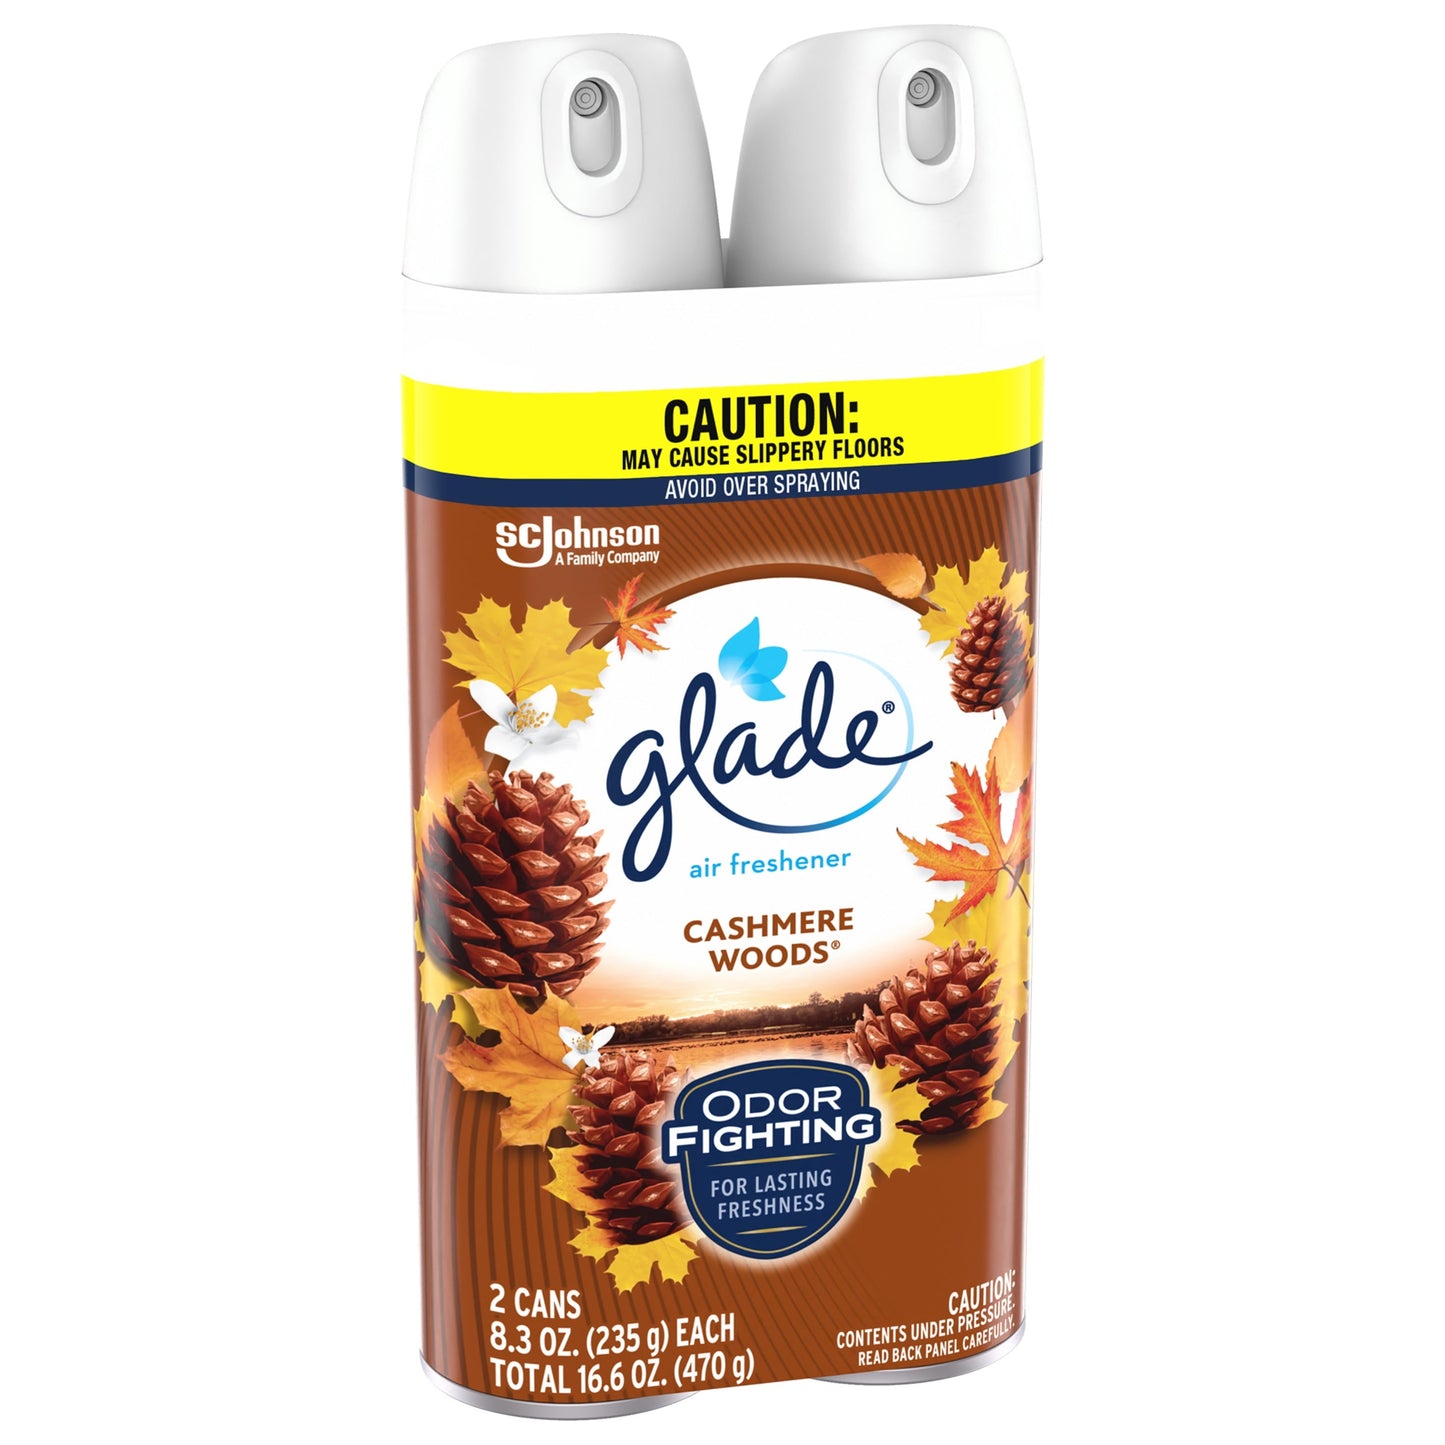 Glade Aerosol Spray, Air Freshener for Home, Cashmere Woods Scent, Fragrance Infused with Essential Oils, Invigorating and Refreshing, with 100% Natural Propellent, 8.3 oz, 2 Pack